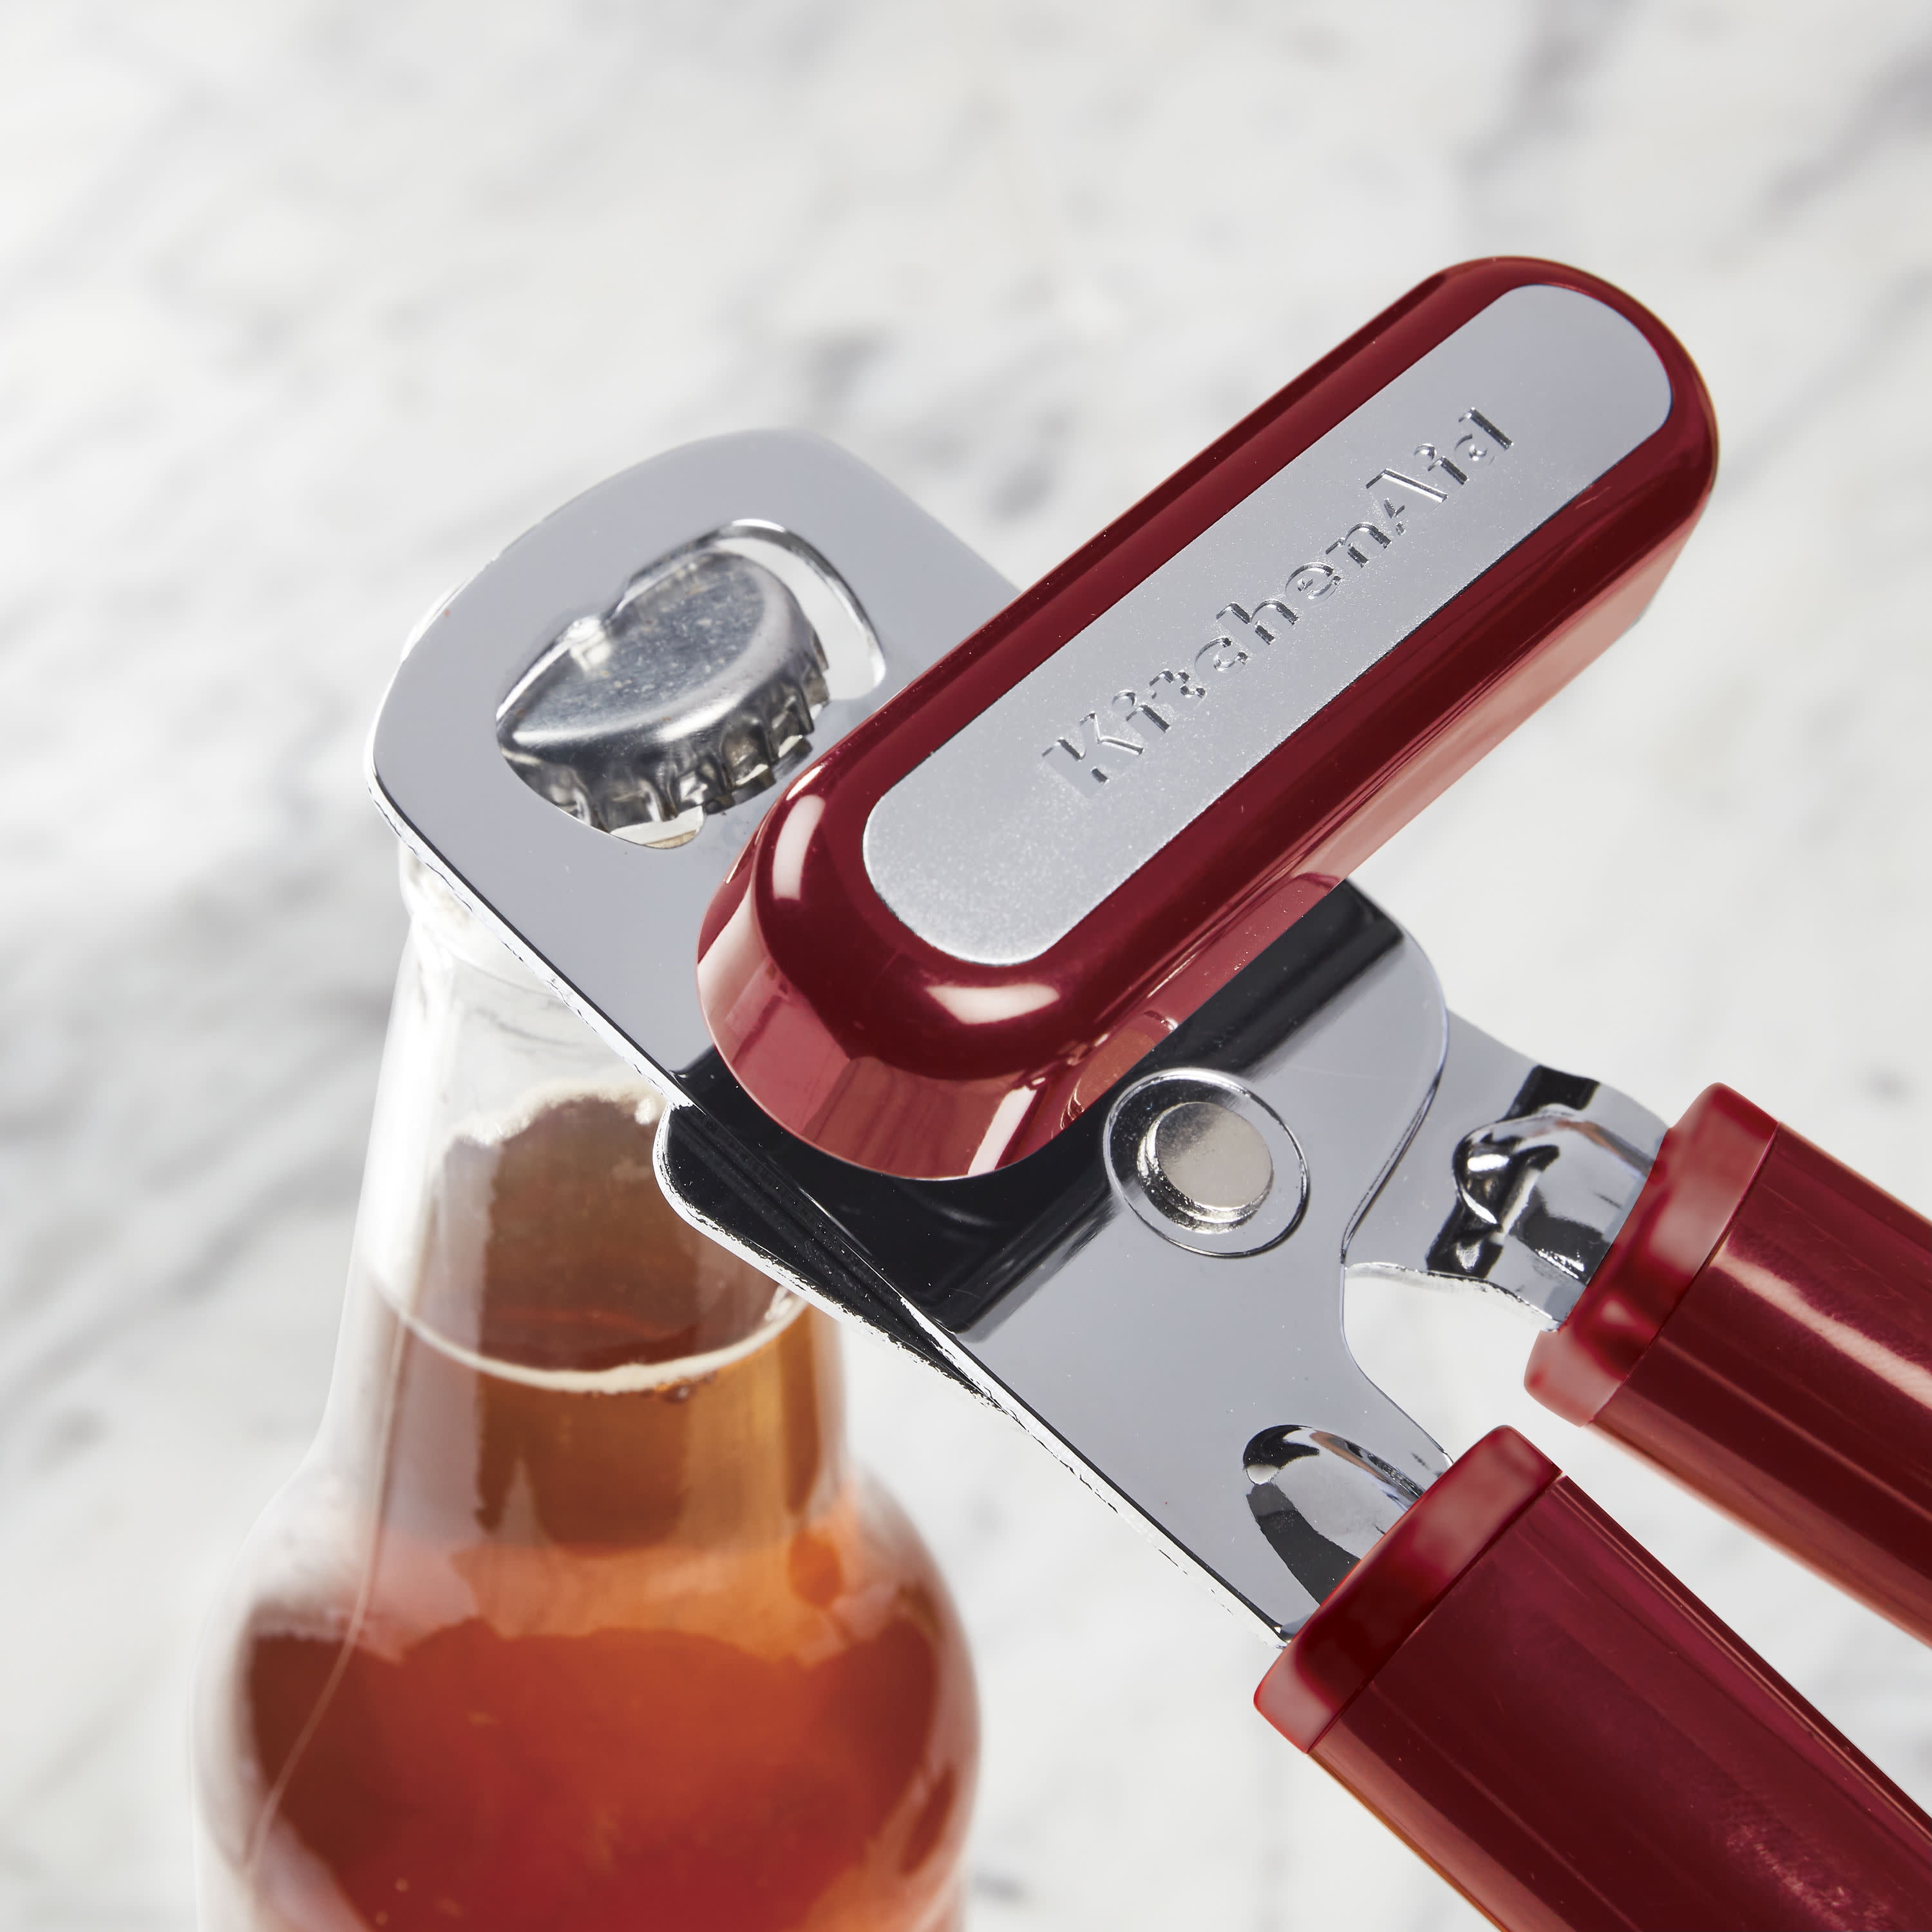 KitchenAid Multifunction Can Opener with Bottle Opener, 1 ct